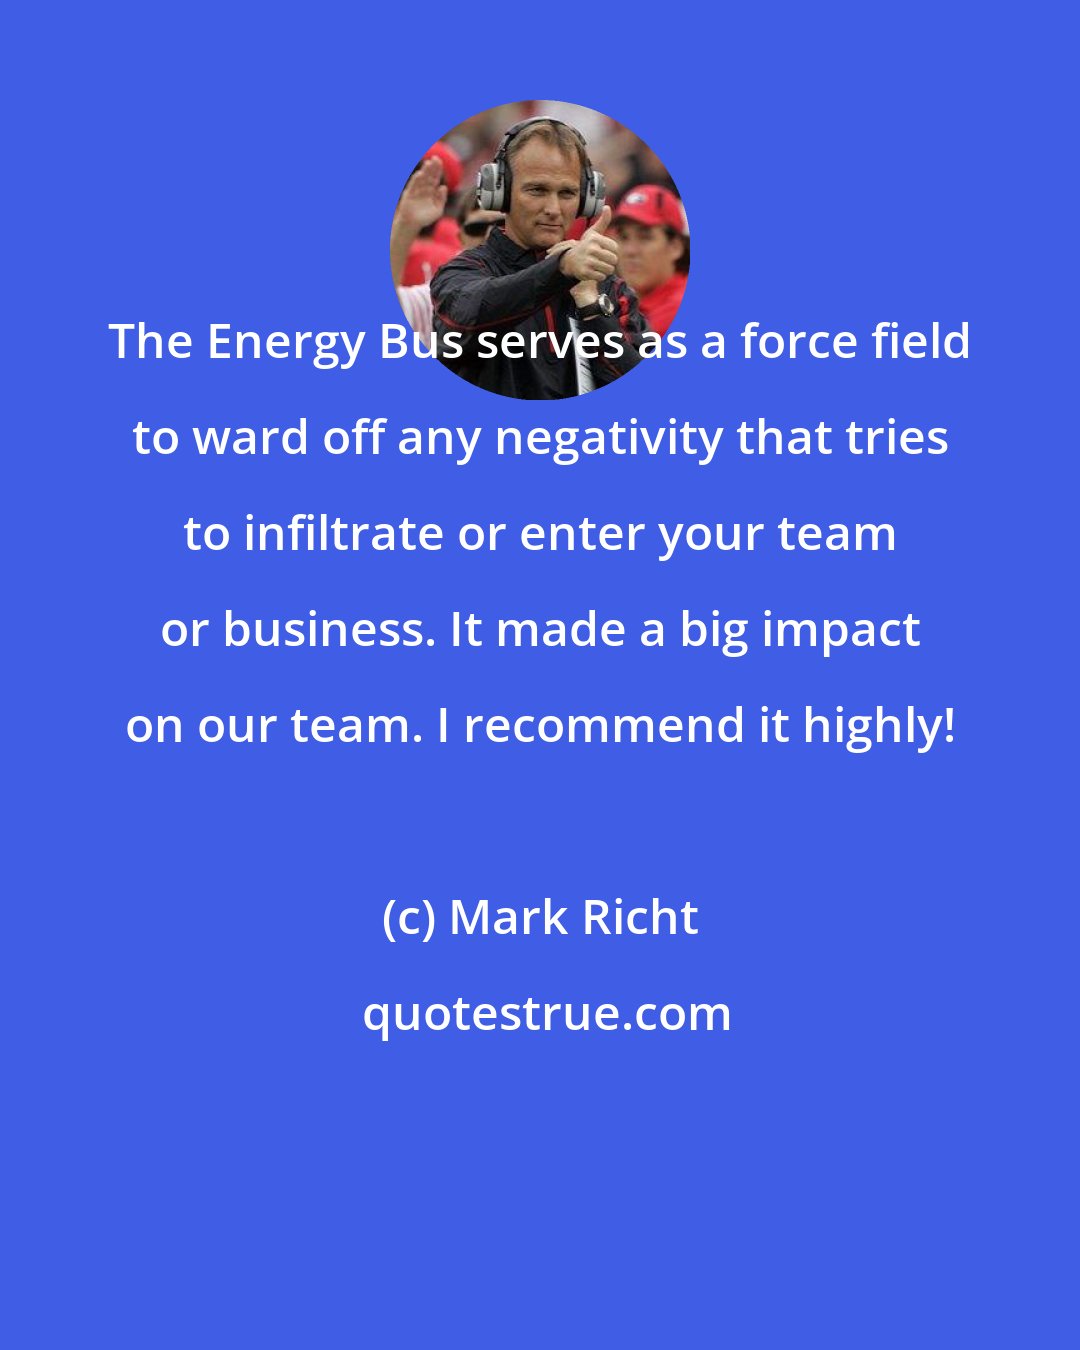 Mark Richt: The Energy Bus serves as a force field to ward off any negativity that tries to infiltrate or enter your team or business. It made a big impact on our team. I recommend it highly!